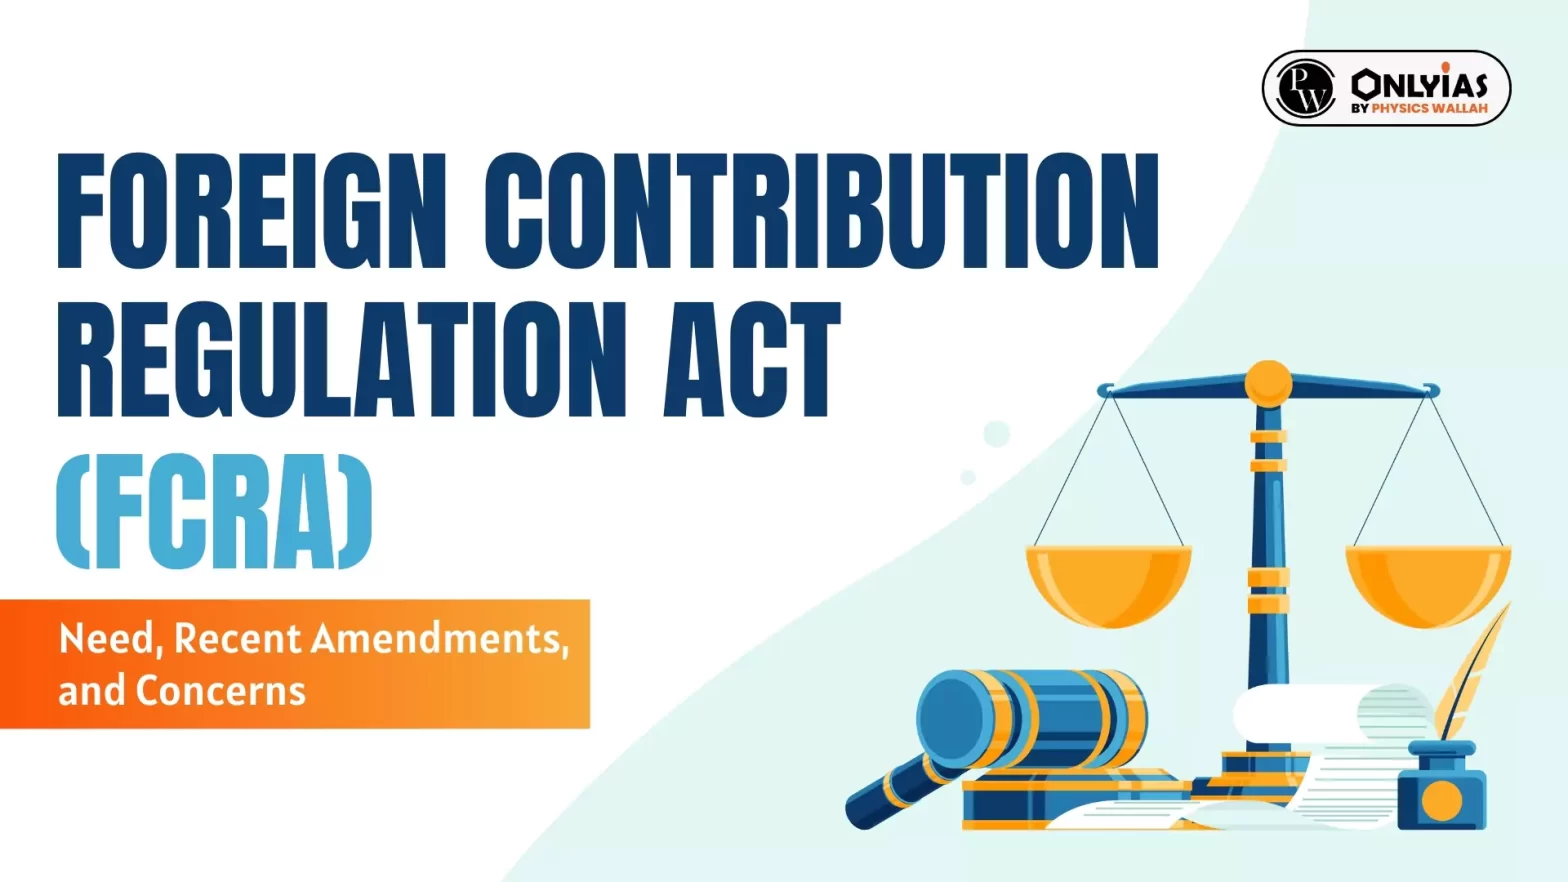 Foreign Contribution Regulation Act (FCRA): Need, Recent Amendments, and Concerns